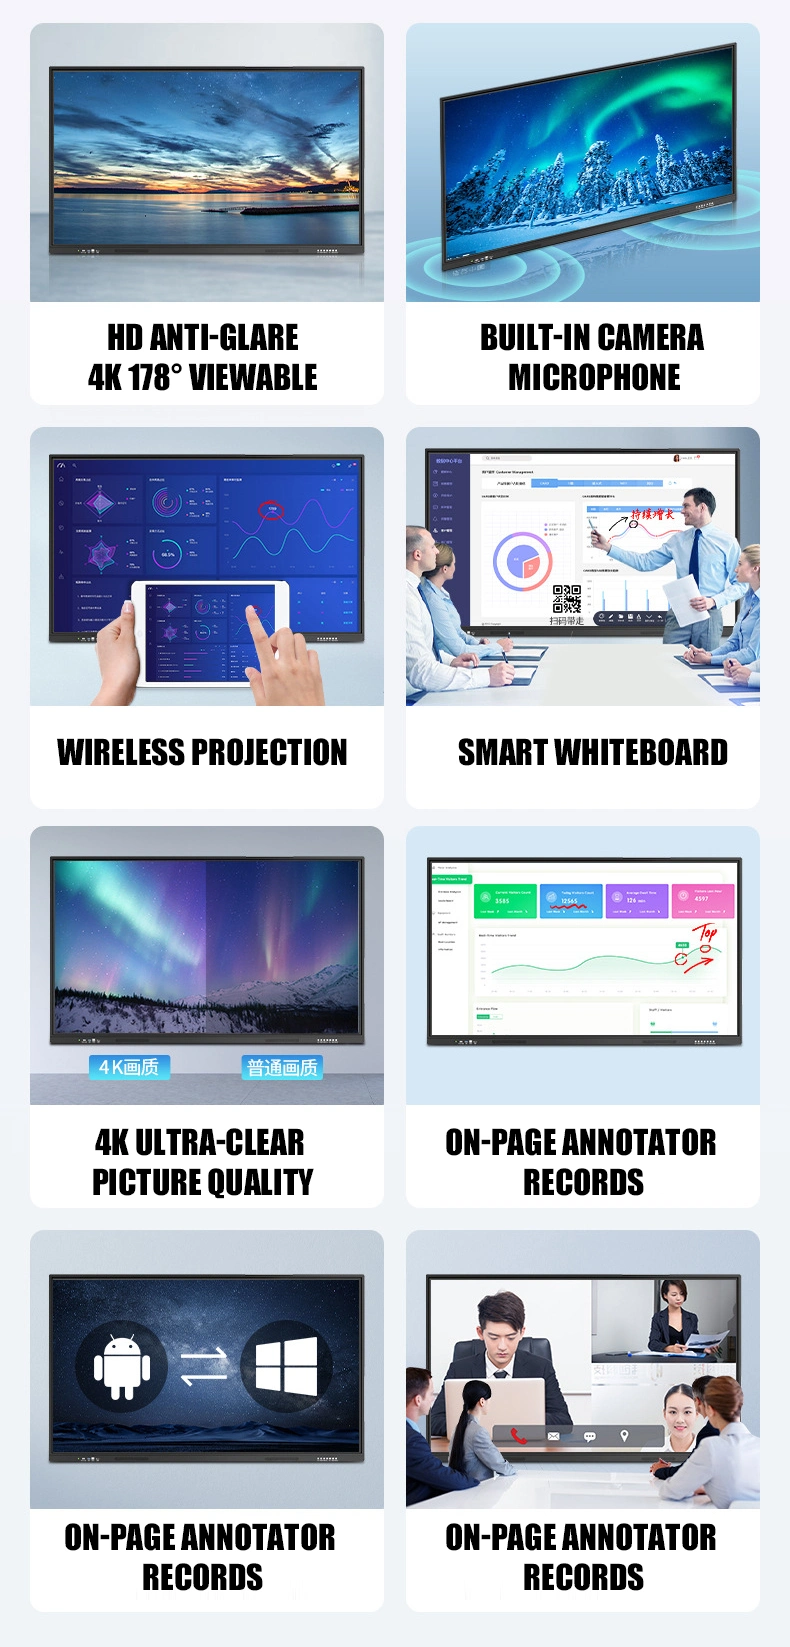 Dual OS Android / X86 Windows Capacitive or Infrared Touch Screen Interactive Whiteboard Classroom Teaching 55